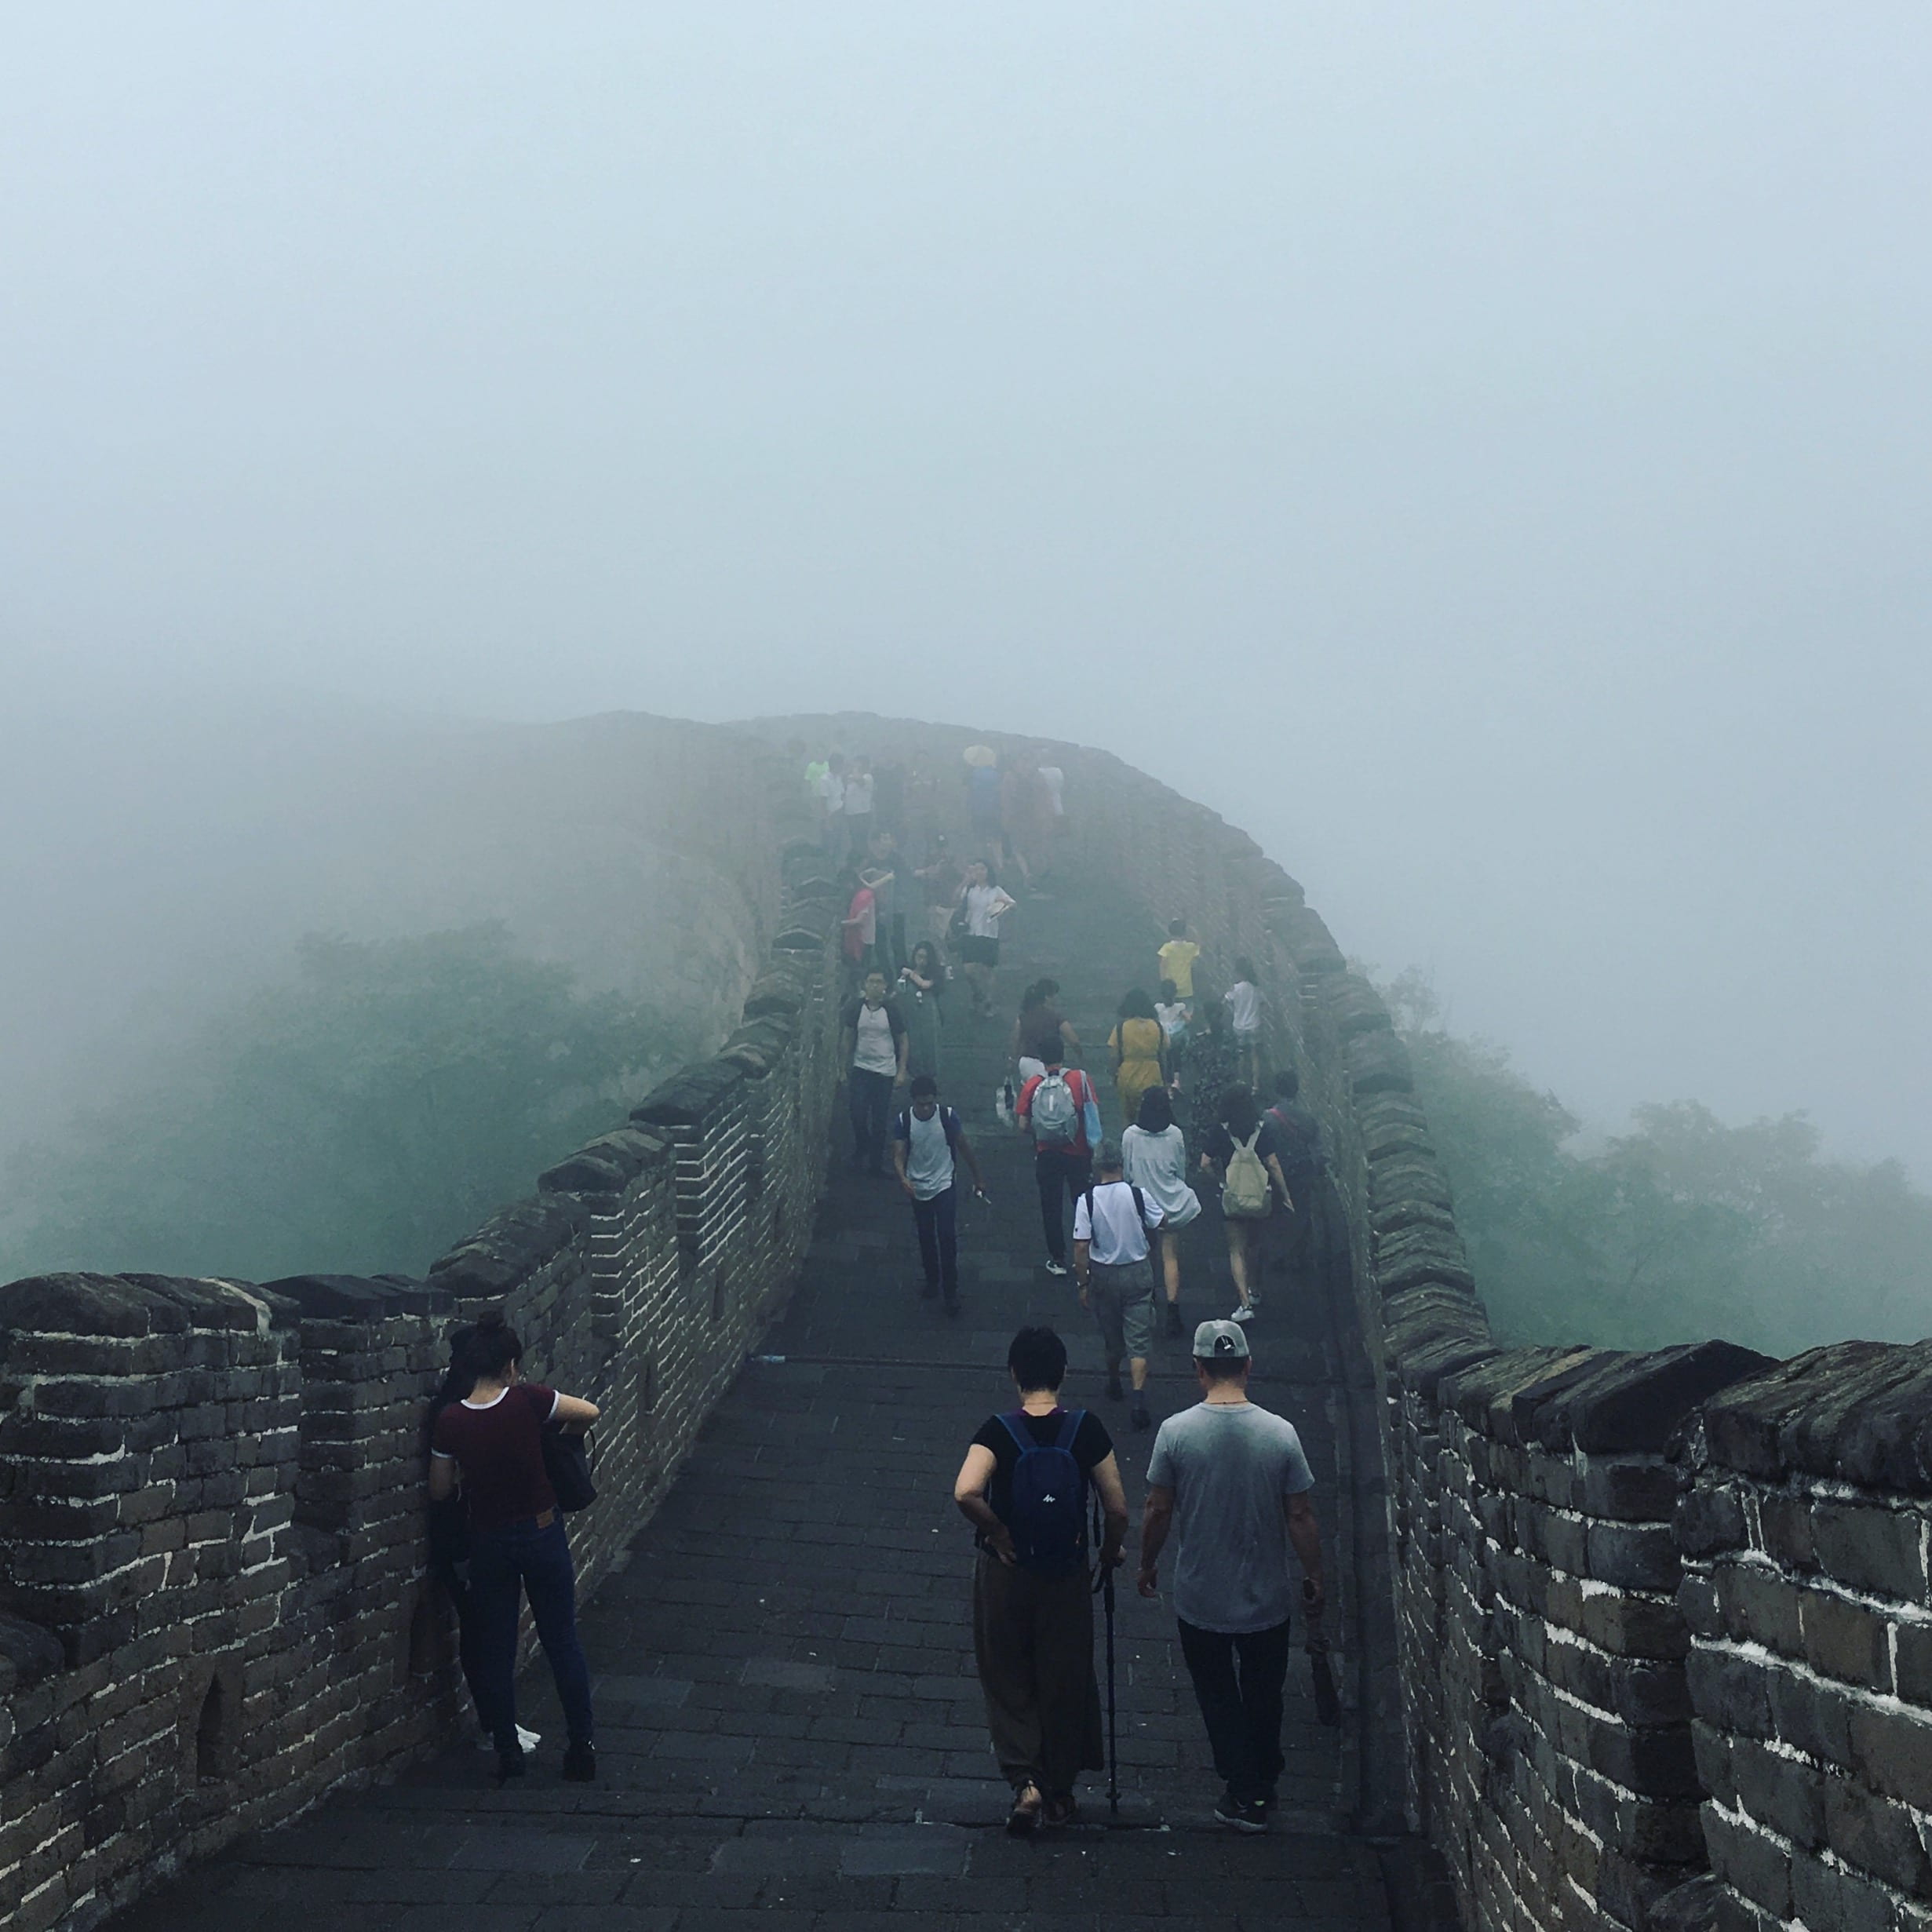 hiking the Great Wall of China on a foggy day